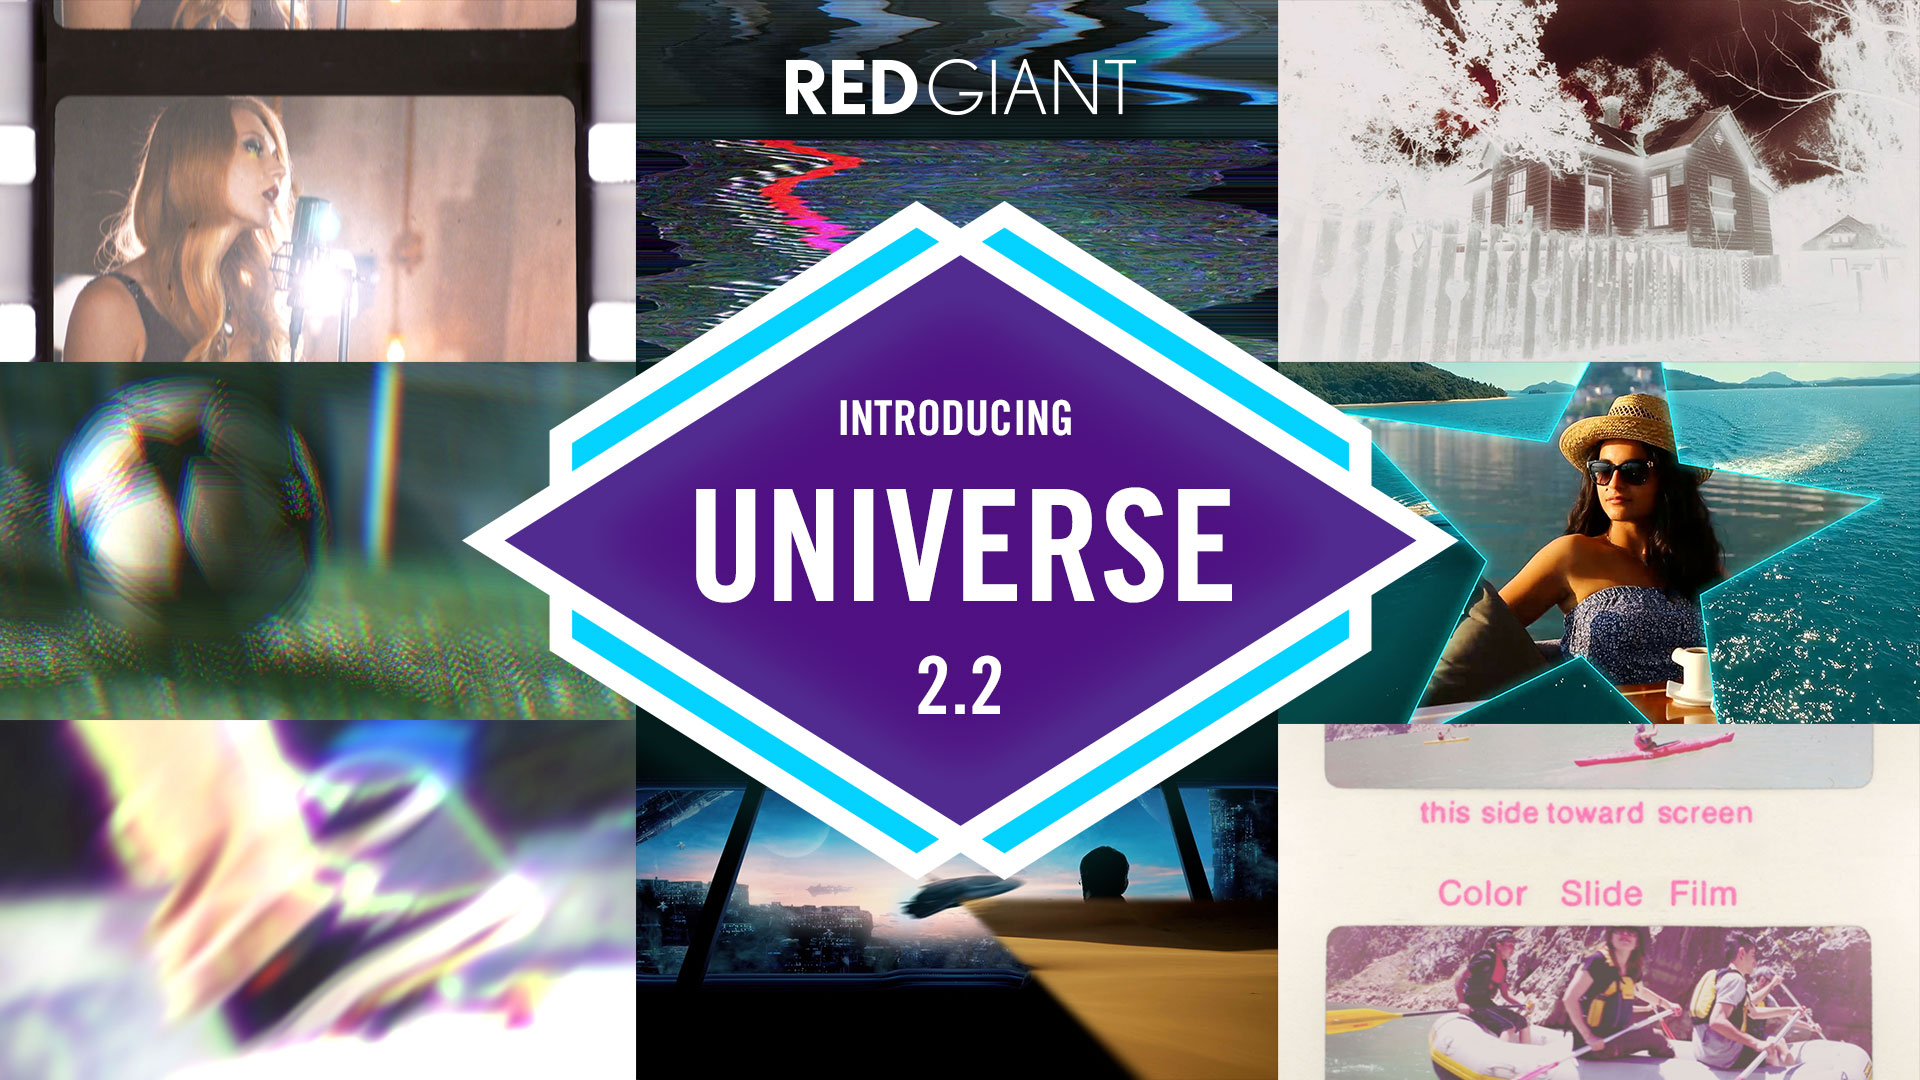 red giant universe 2.1 serial